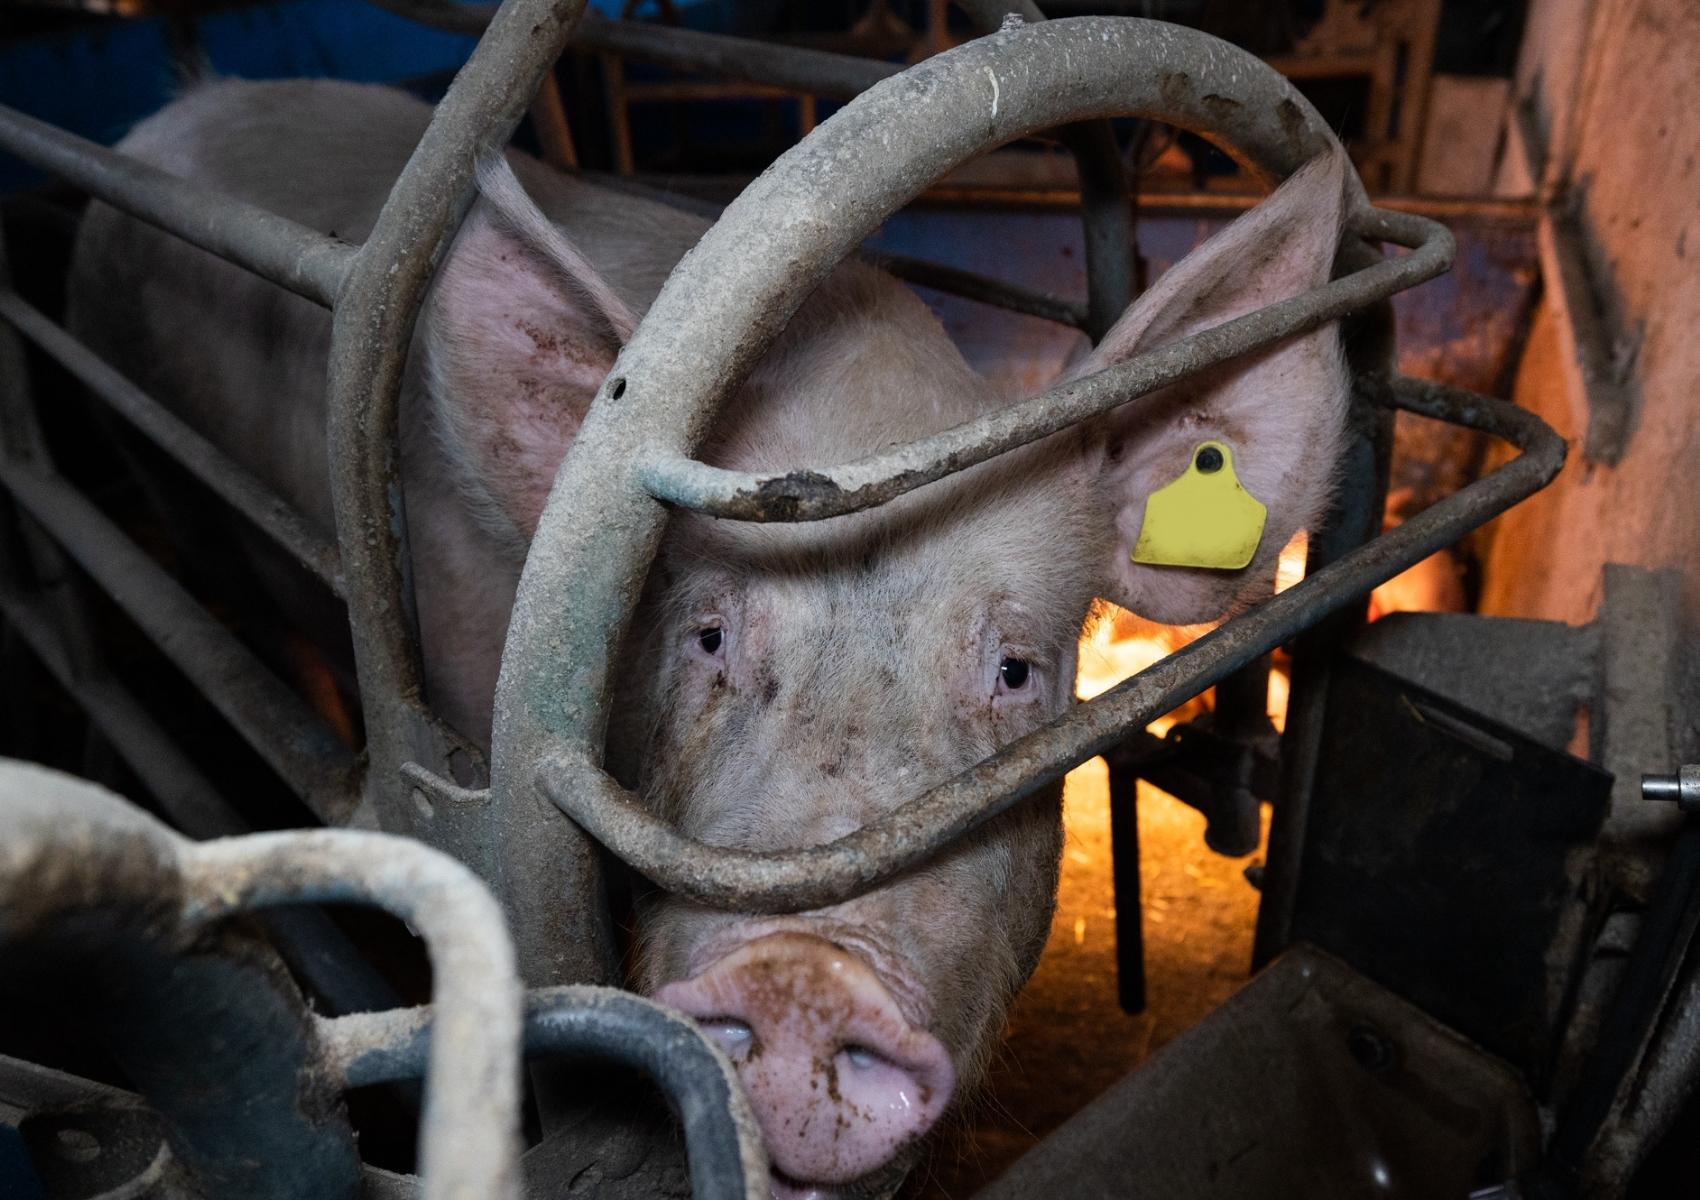 A pig in a crate looking toward the camera